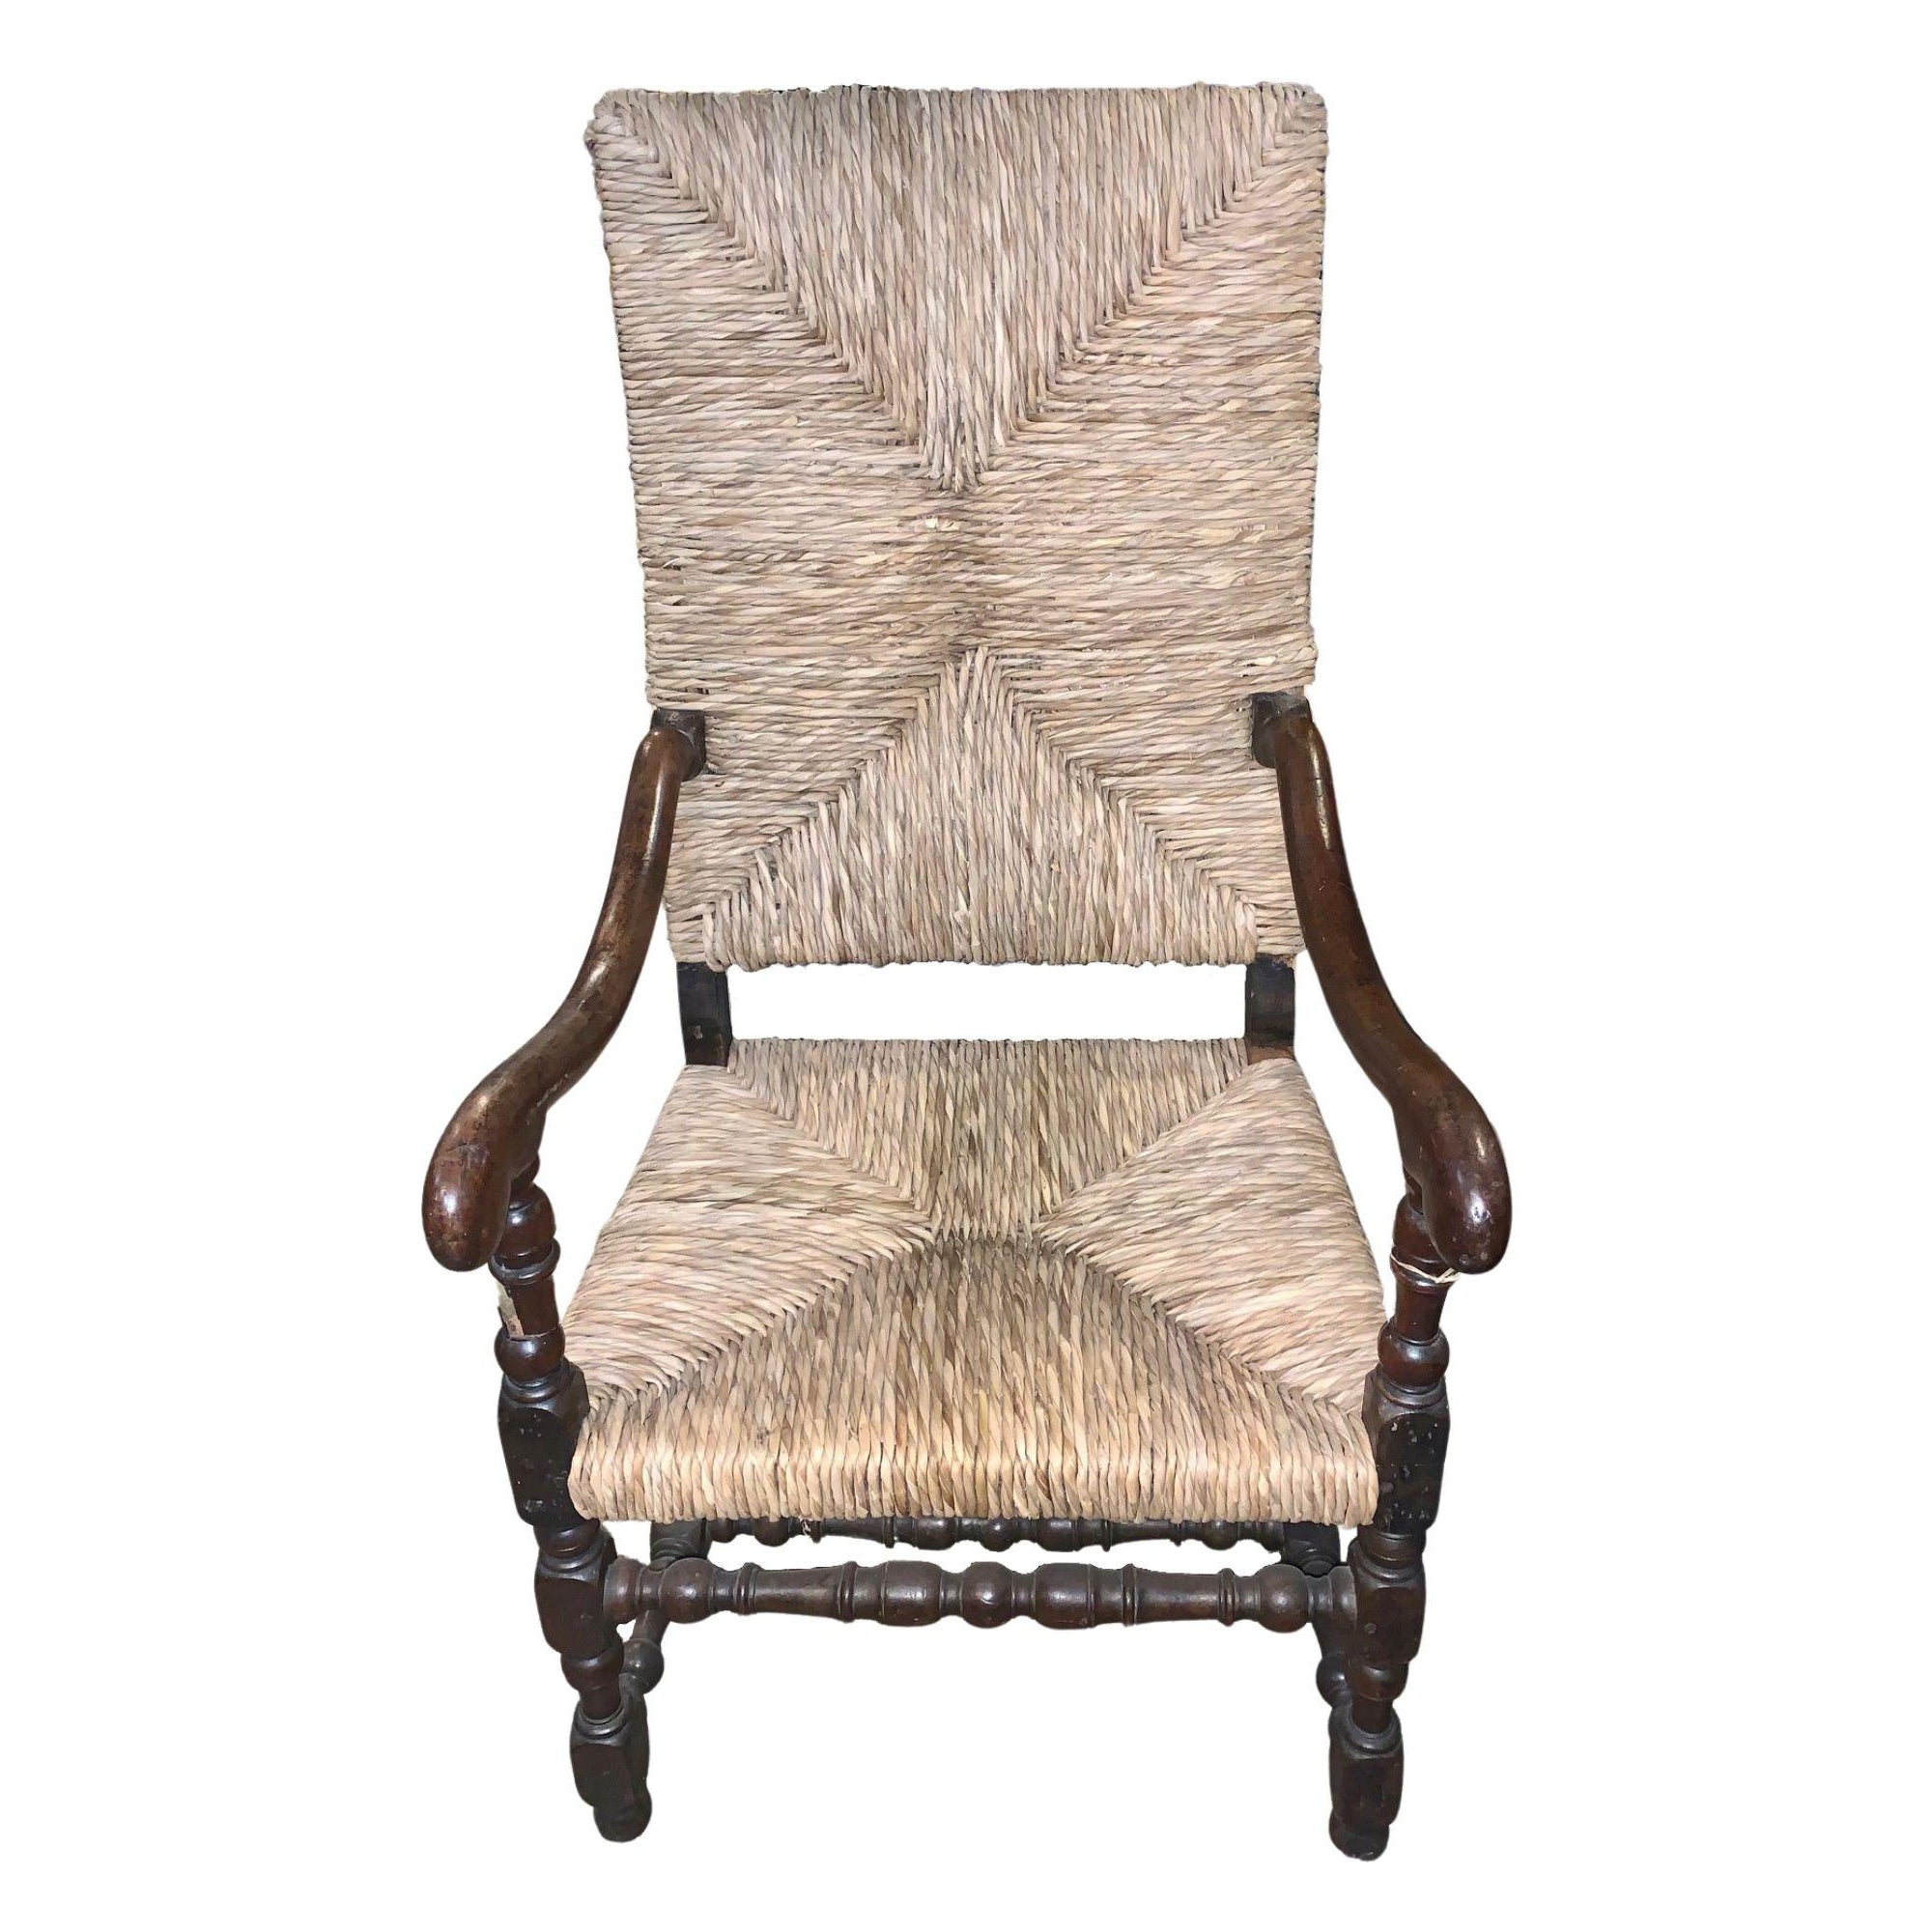 19th Century Chair with Rushed Seat Back